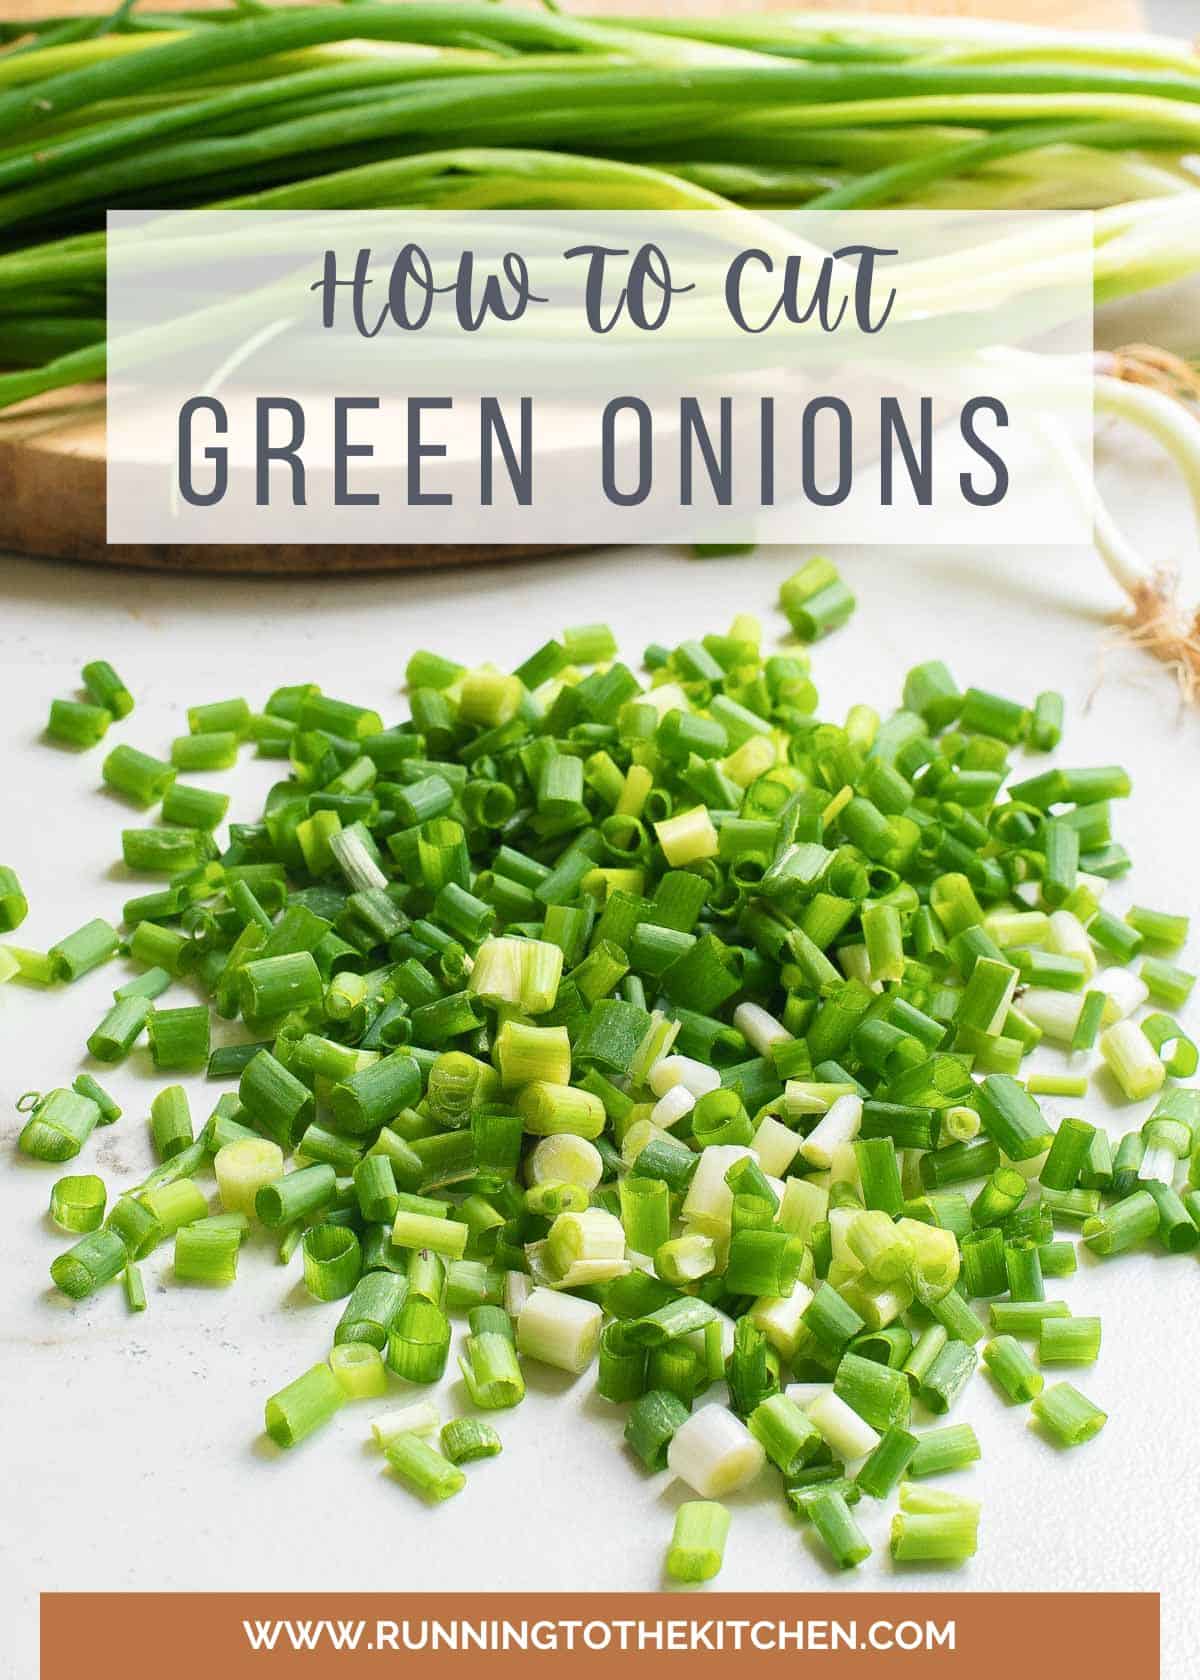 Chopped green onions with "how to cut green onions" text on image.